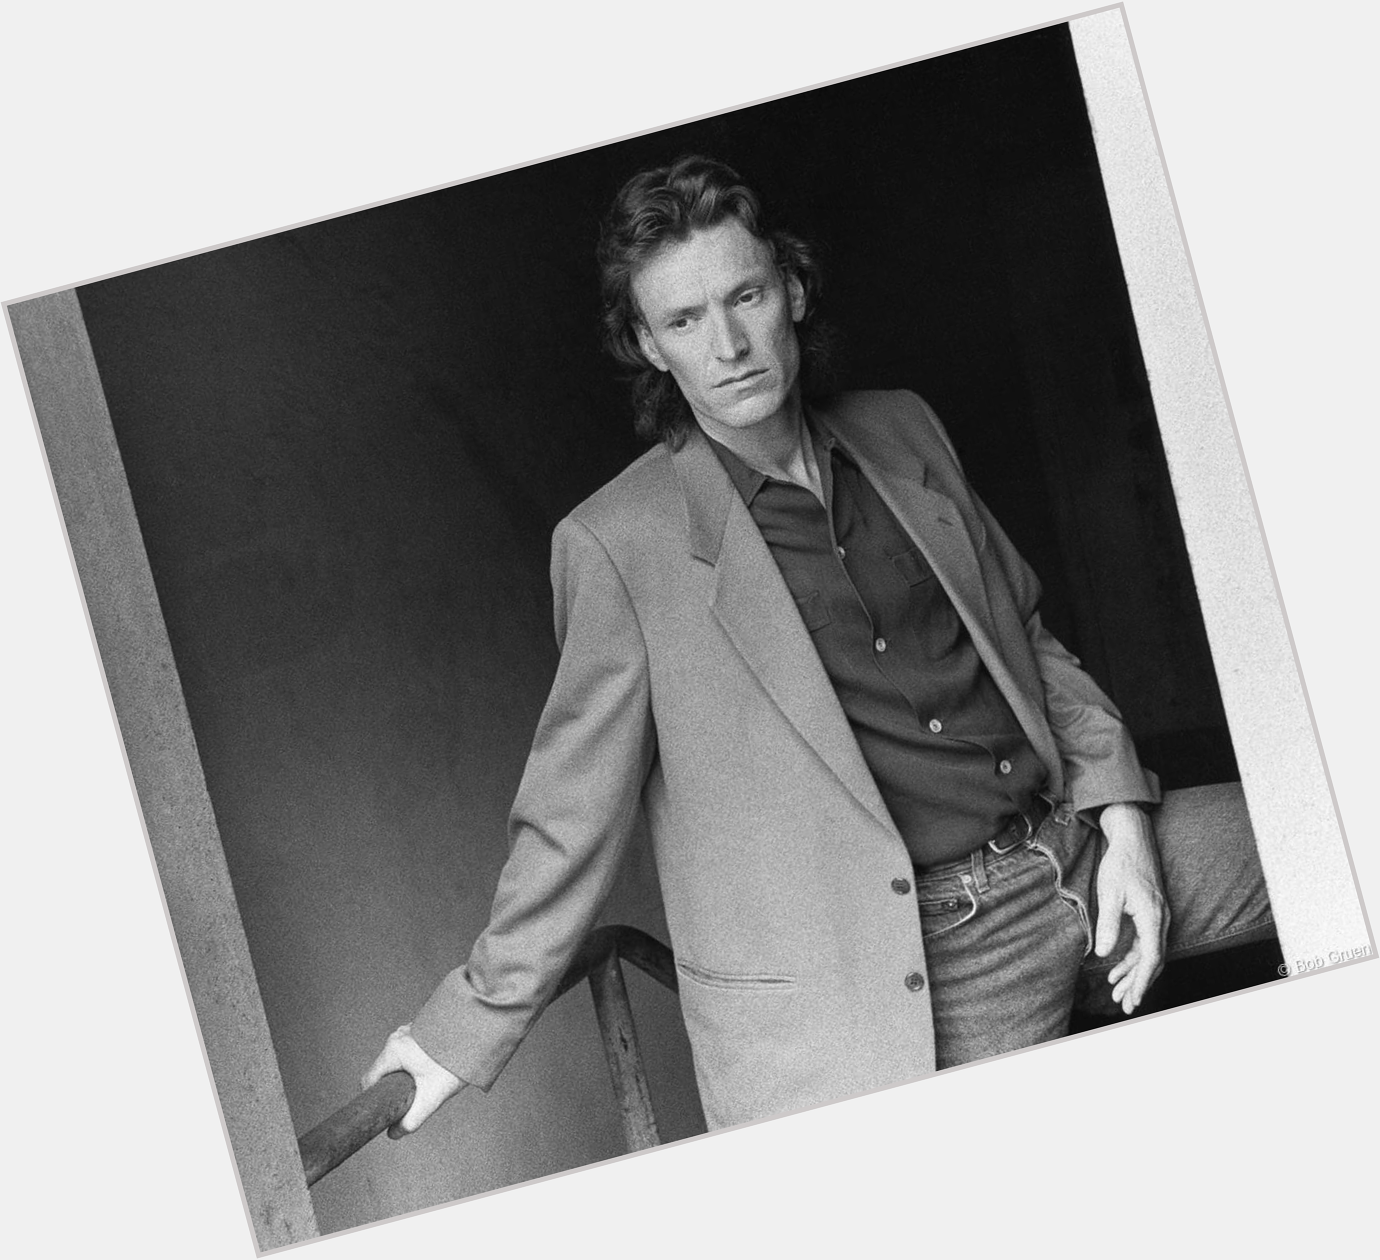 Happy birthday to English singer, songwriter, musician and multi-instrumentalist Steve Winwood, born May 12, 1948. 